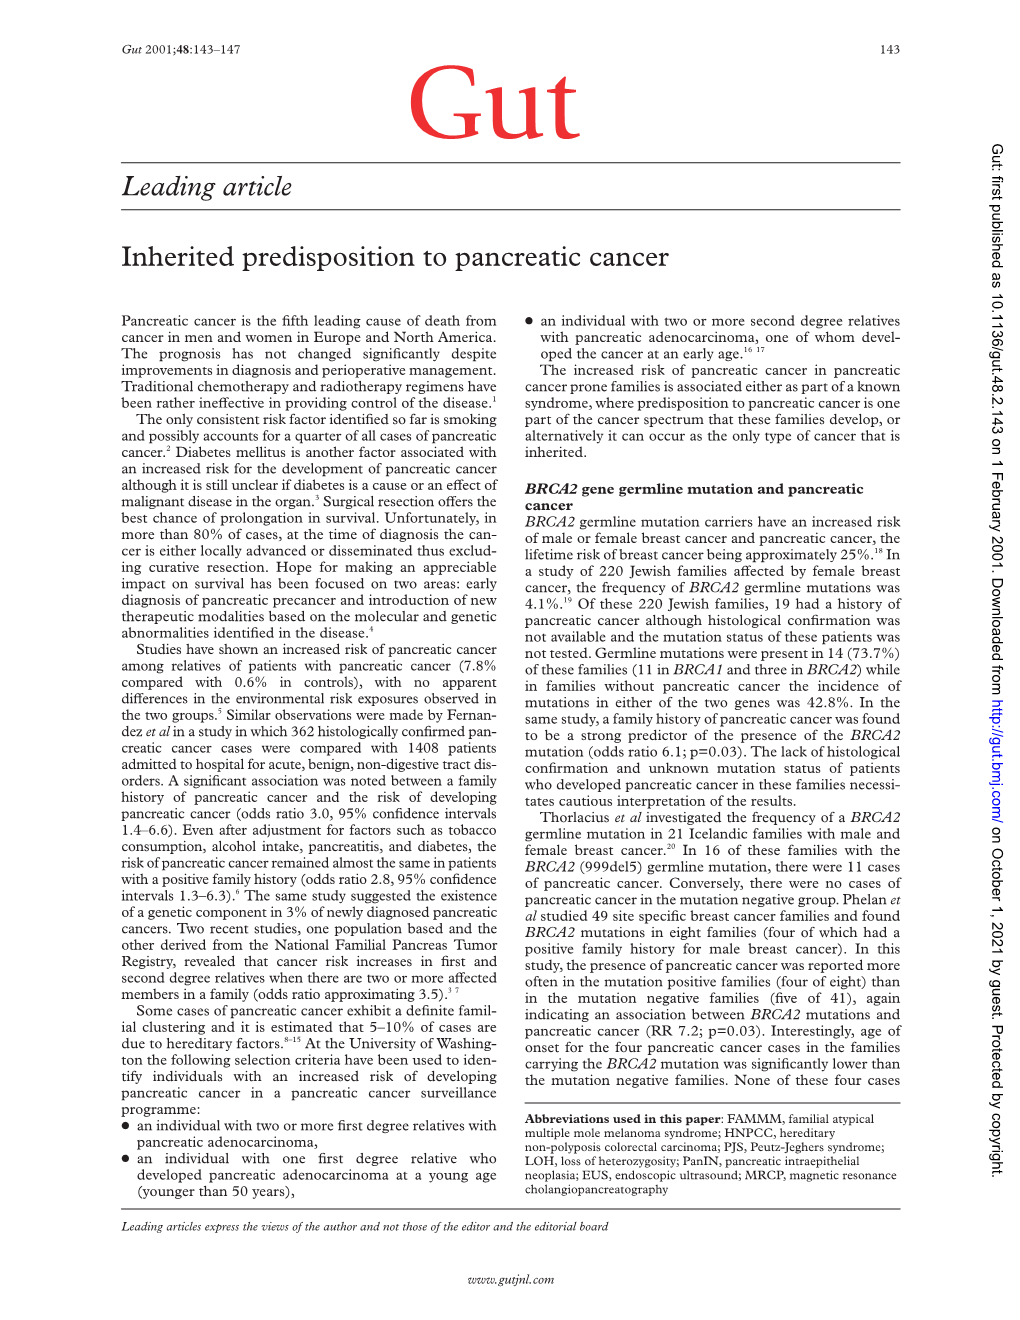 Leading Article Inherited Predisposition to Pancreatic Cancer